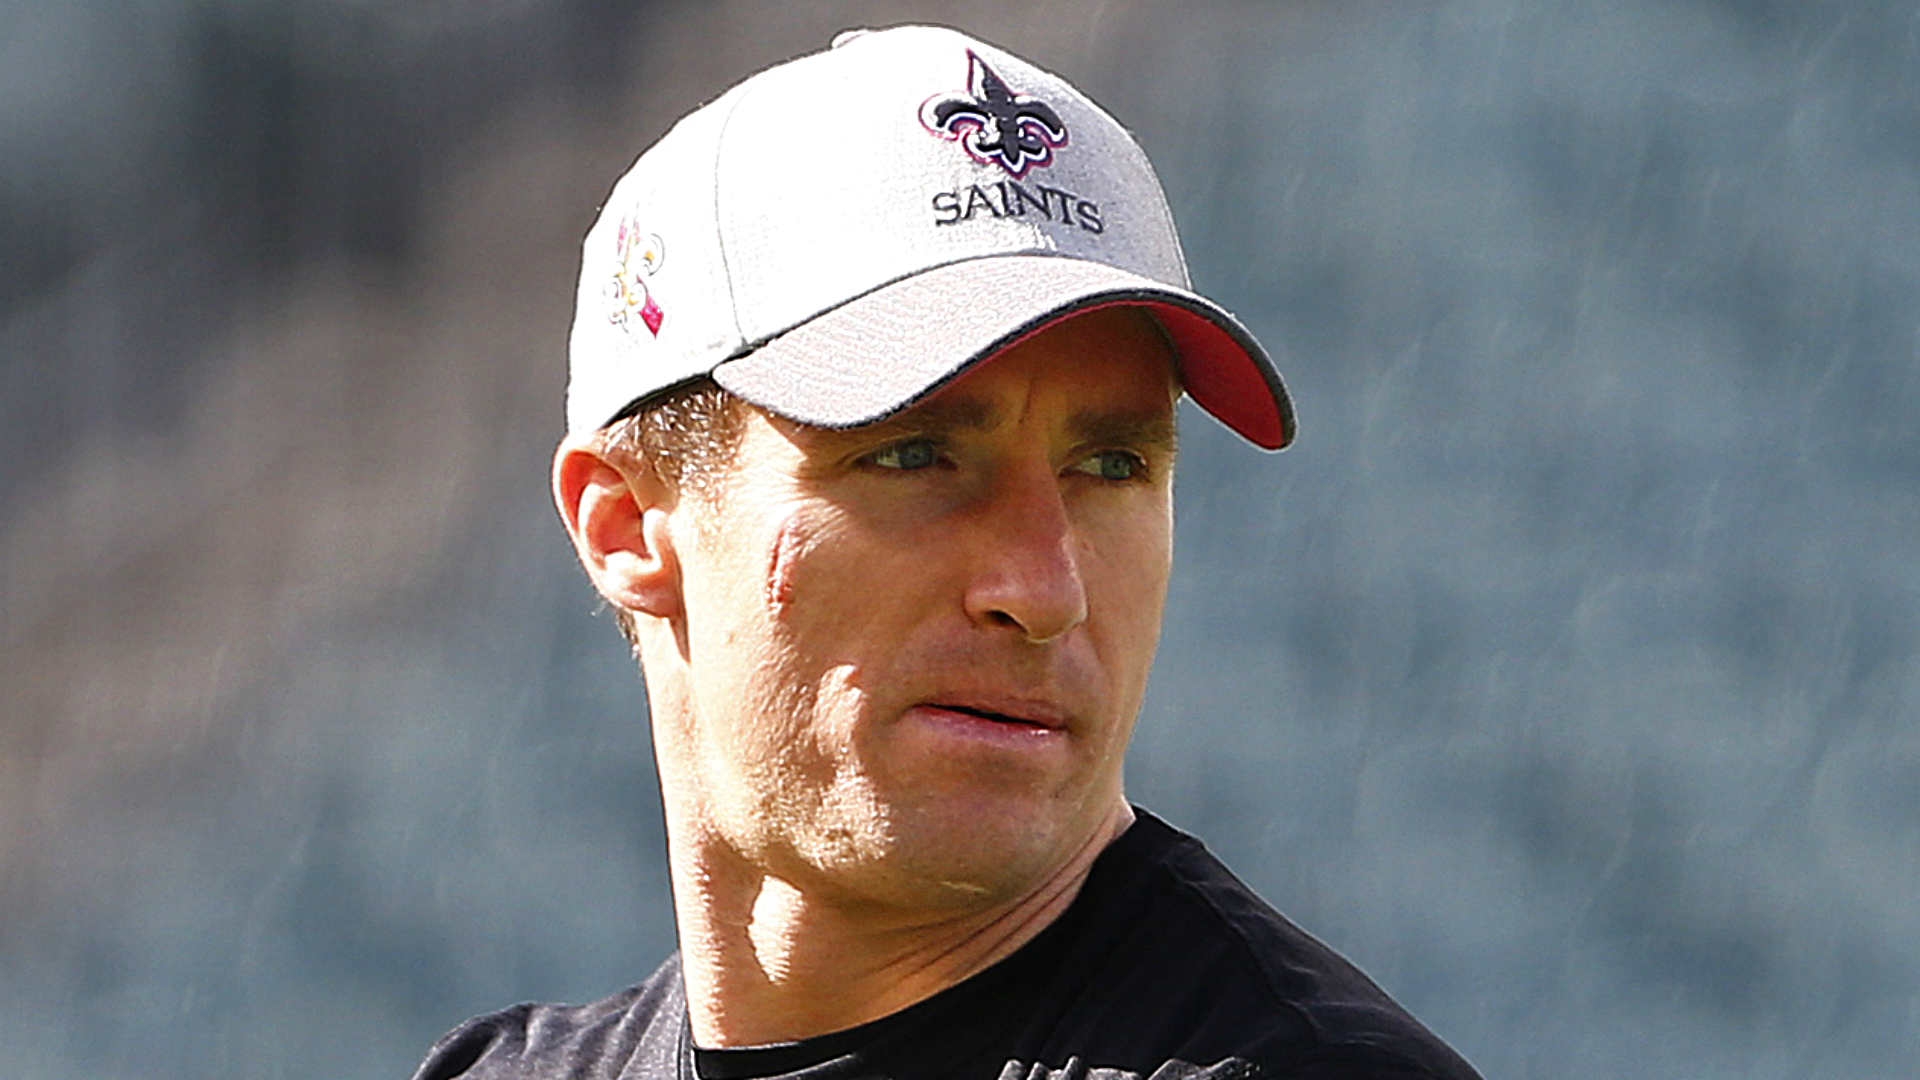 Drew Brees humored by reports of uncertain future with Saints